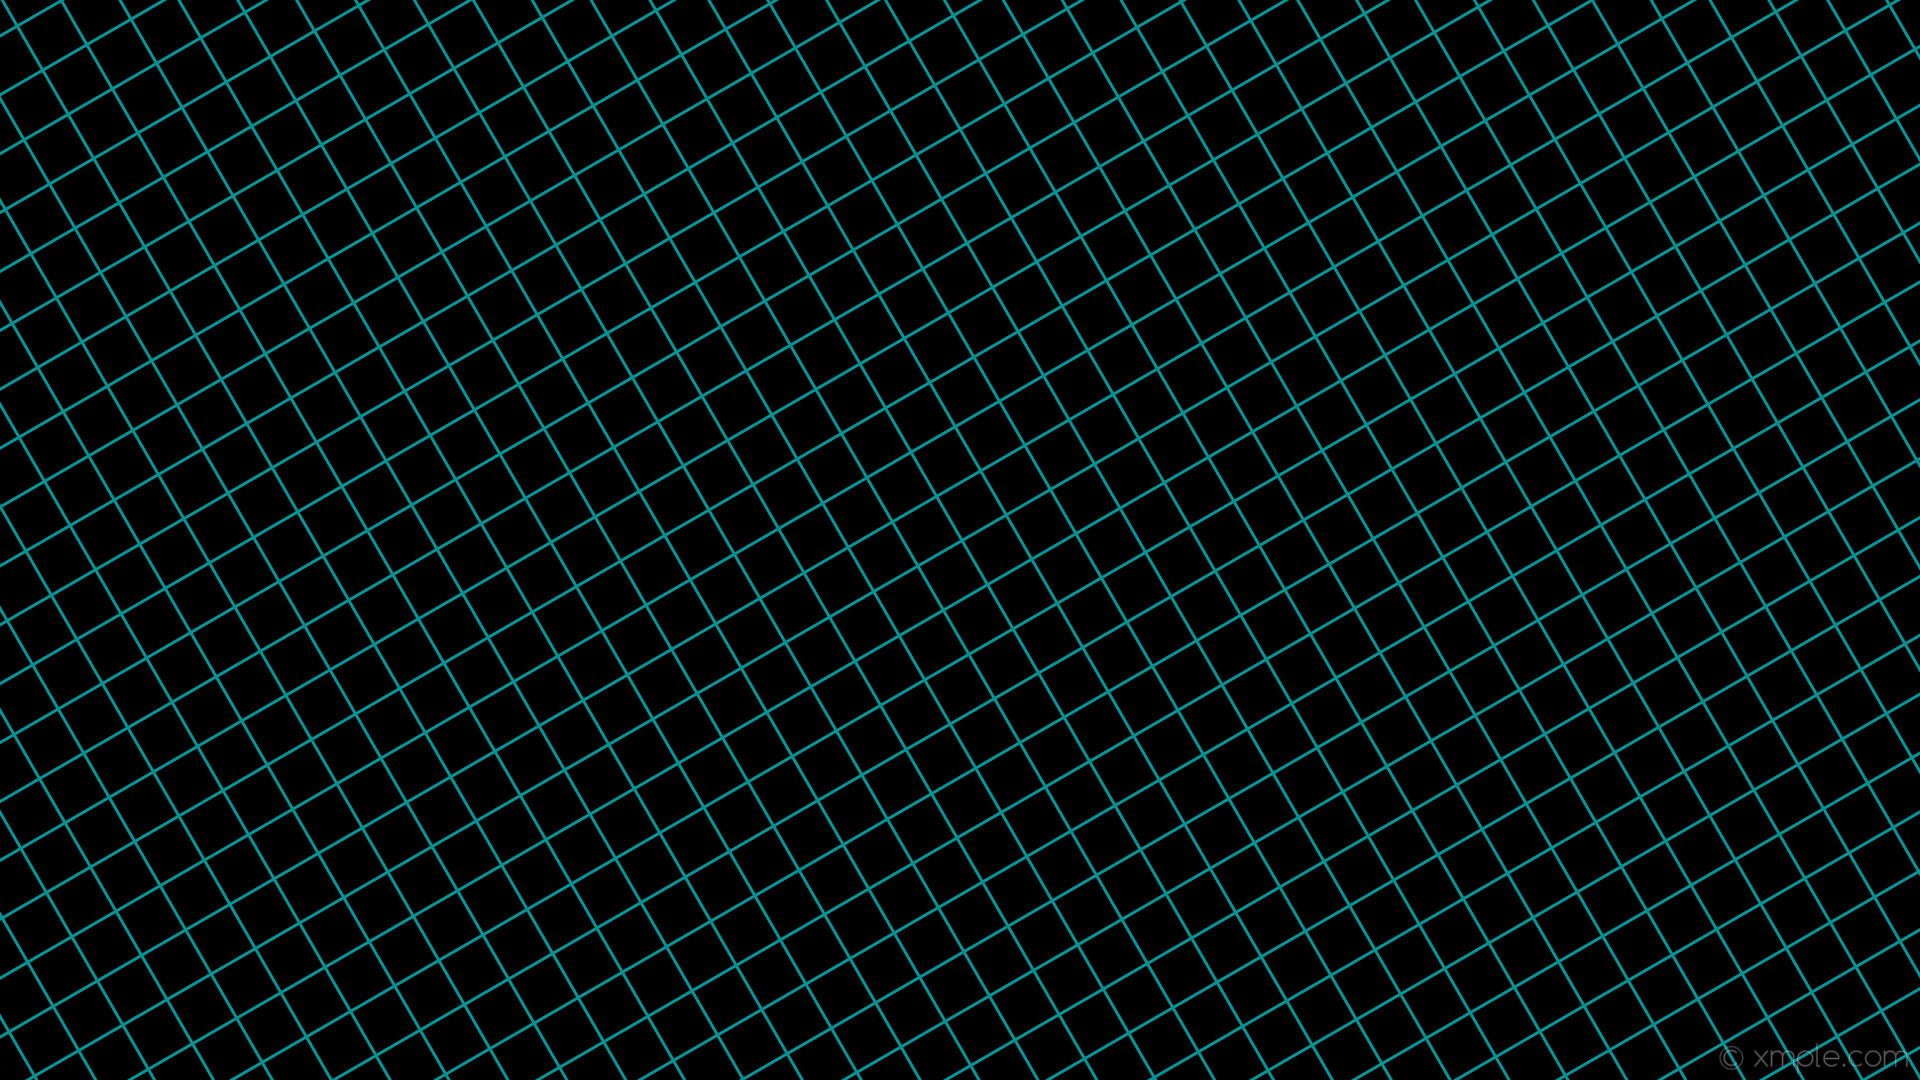 Wallpaper graph paper blue black grid dark turquoise ced1 30 3px 51px